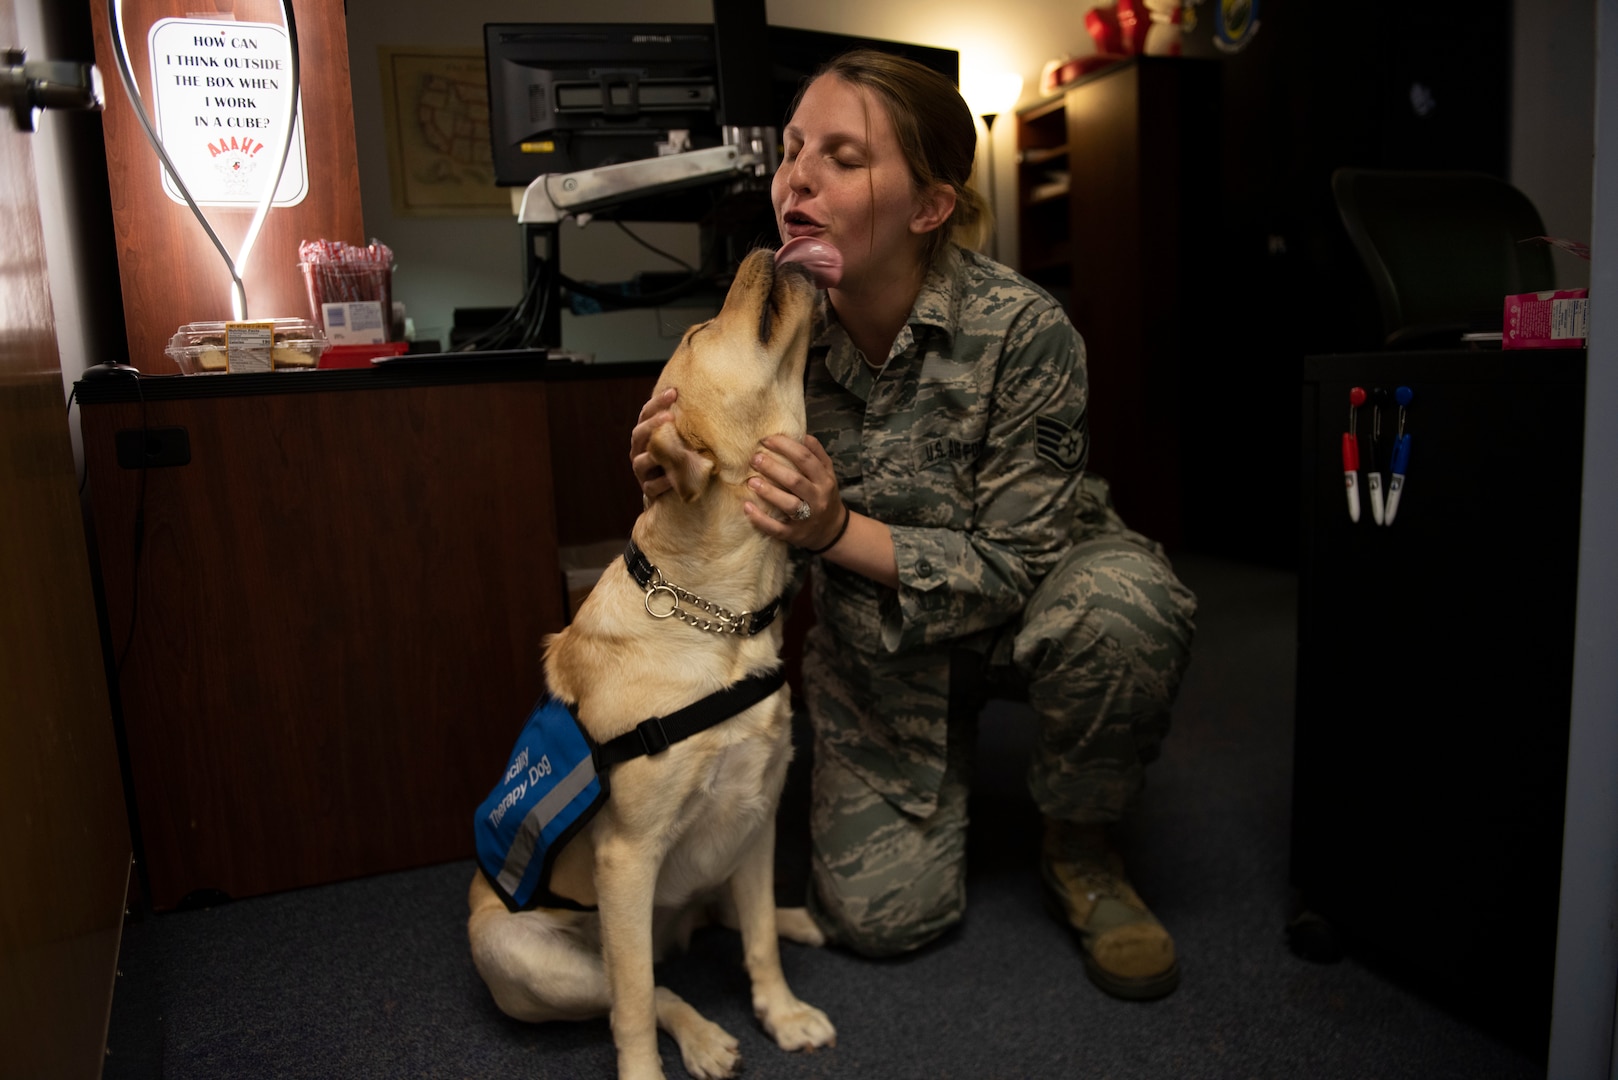 Staff Sgt. Lynn Pilj, 168th Maintenance Squadron unit training manager, spends time with Kansas, the Alaska Air National Guard 168th Wing therapy dog at Eielson Air Force Base, Alaska, July 22, 2019. Kansas works with the 168th Wing's director of psychological health, Jane Lorenz, to break down interpersonal barriers and help Airmen connect with one another.